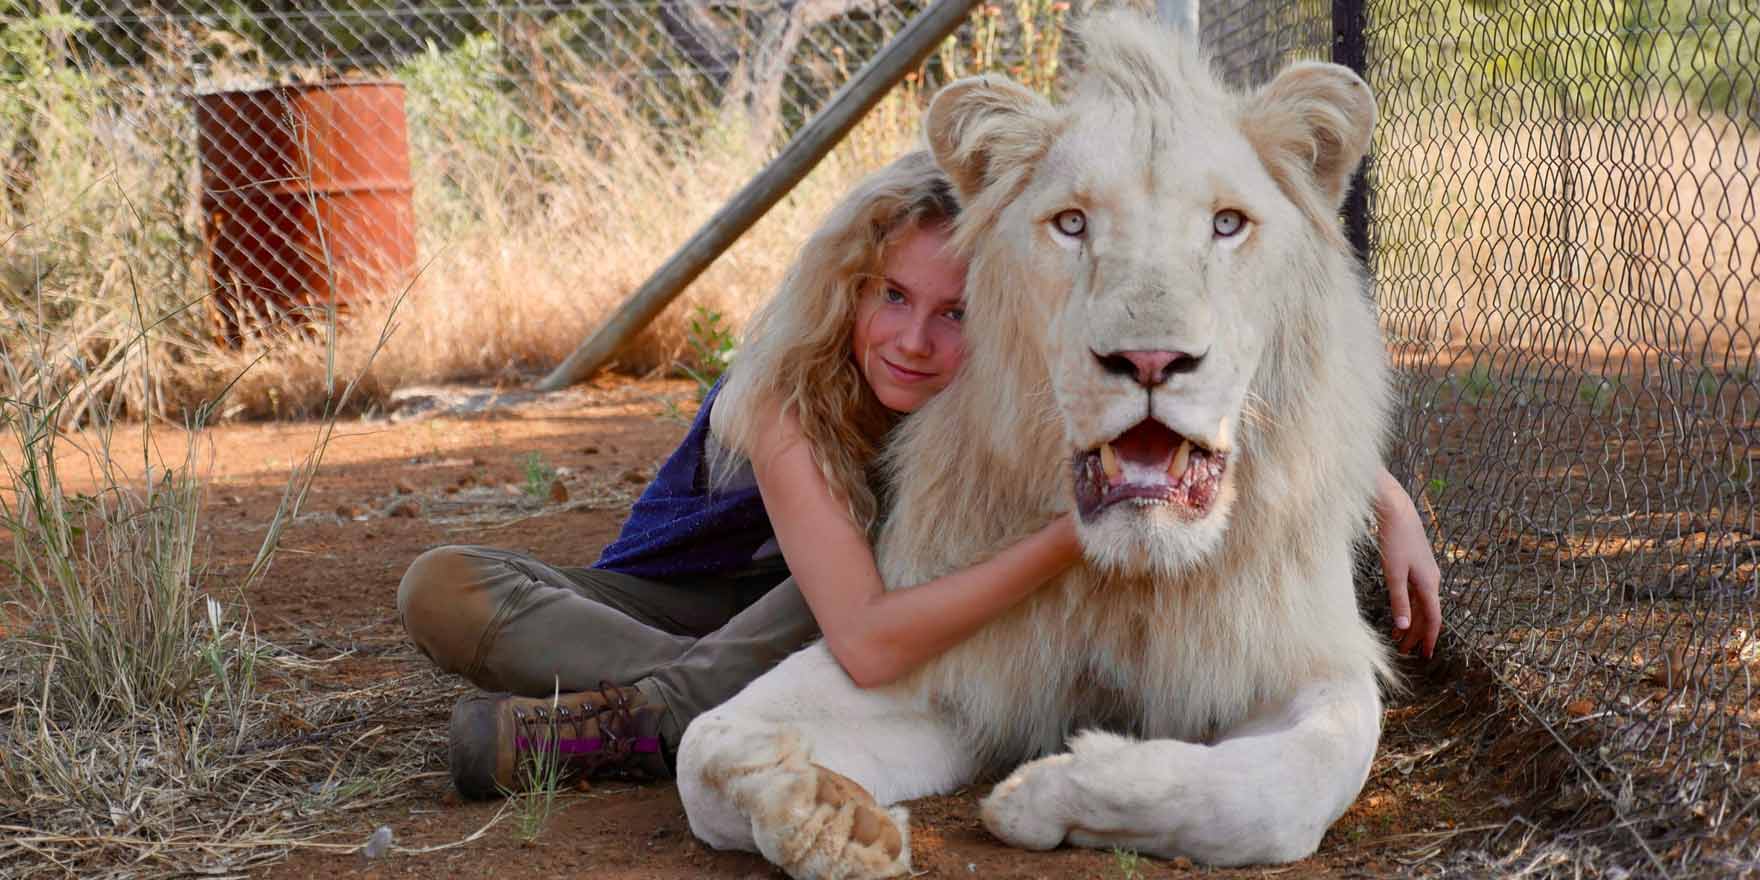 Mia and the White Lion - Header Image